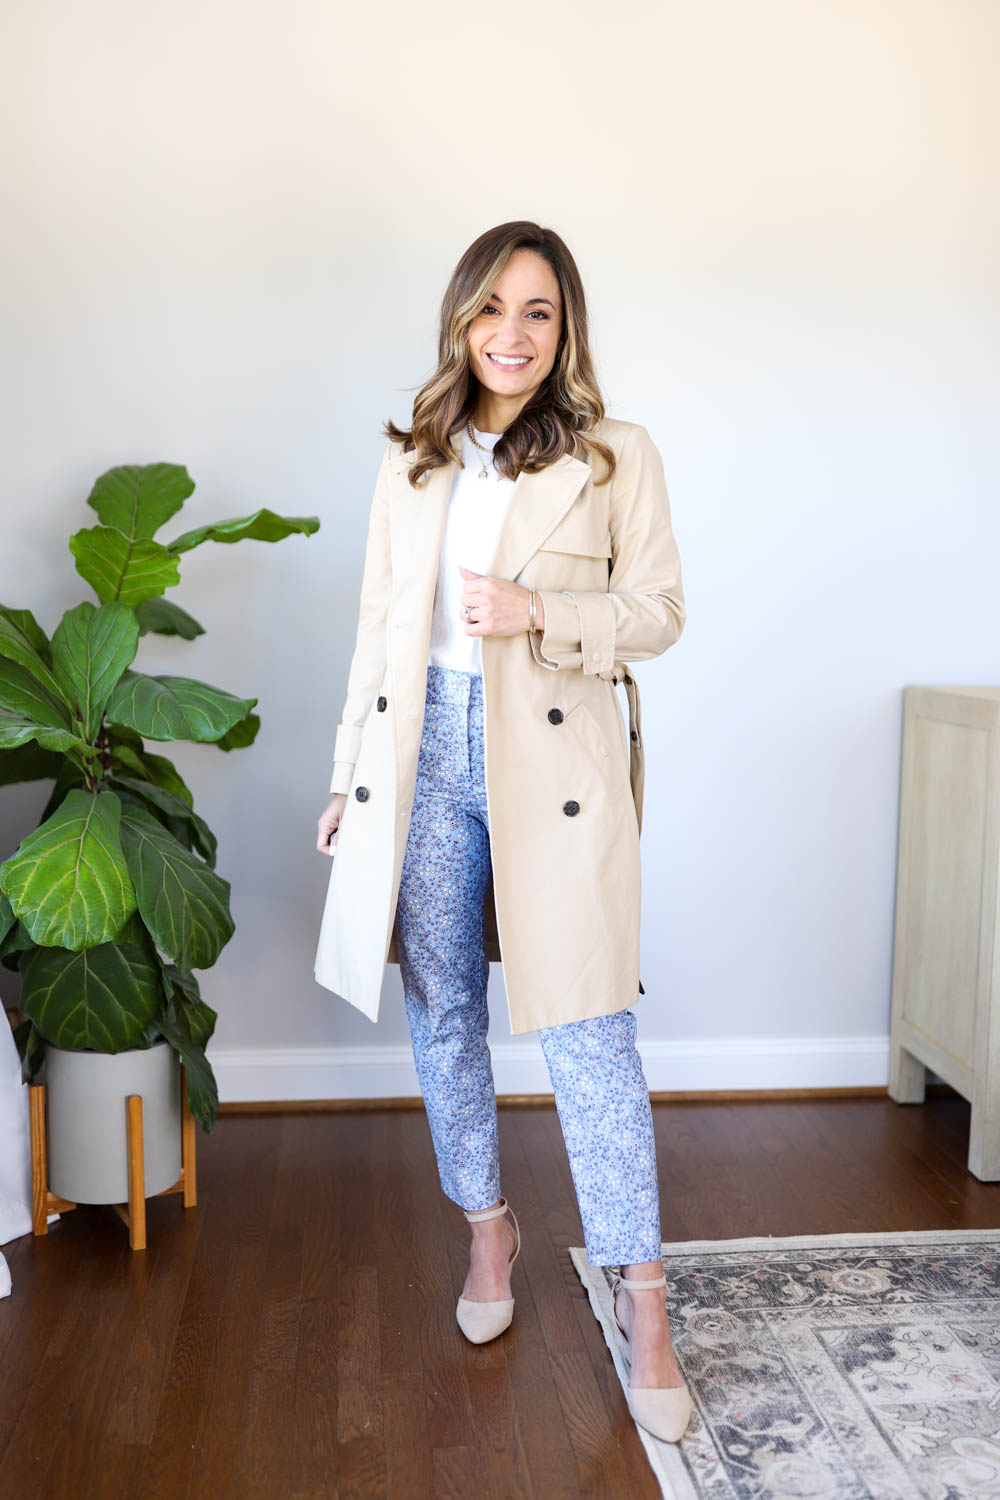 Petite friendly outfits for work via pumps and push-ups blog | petite style blog | petite fashion